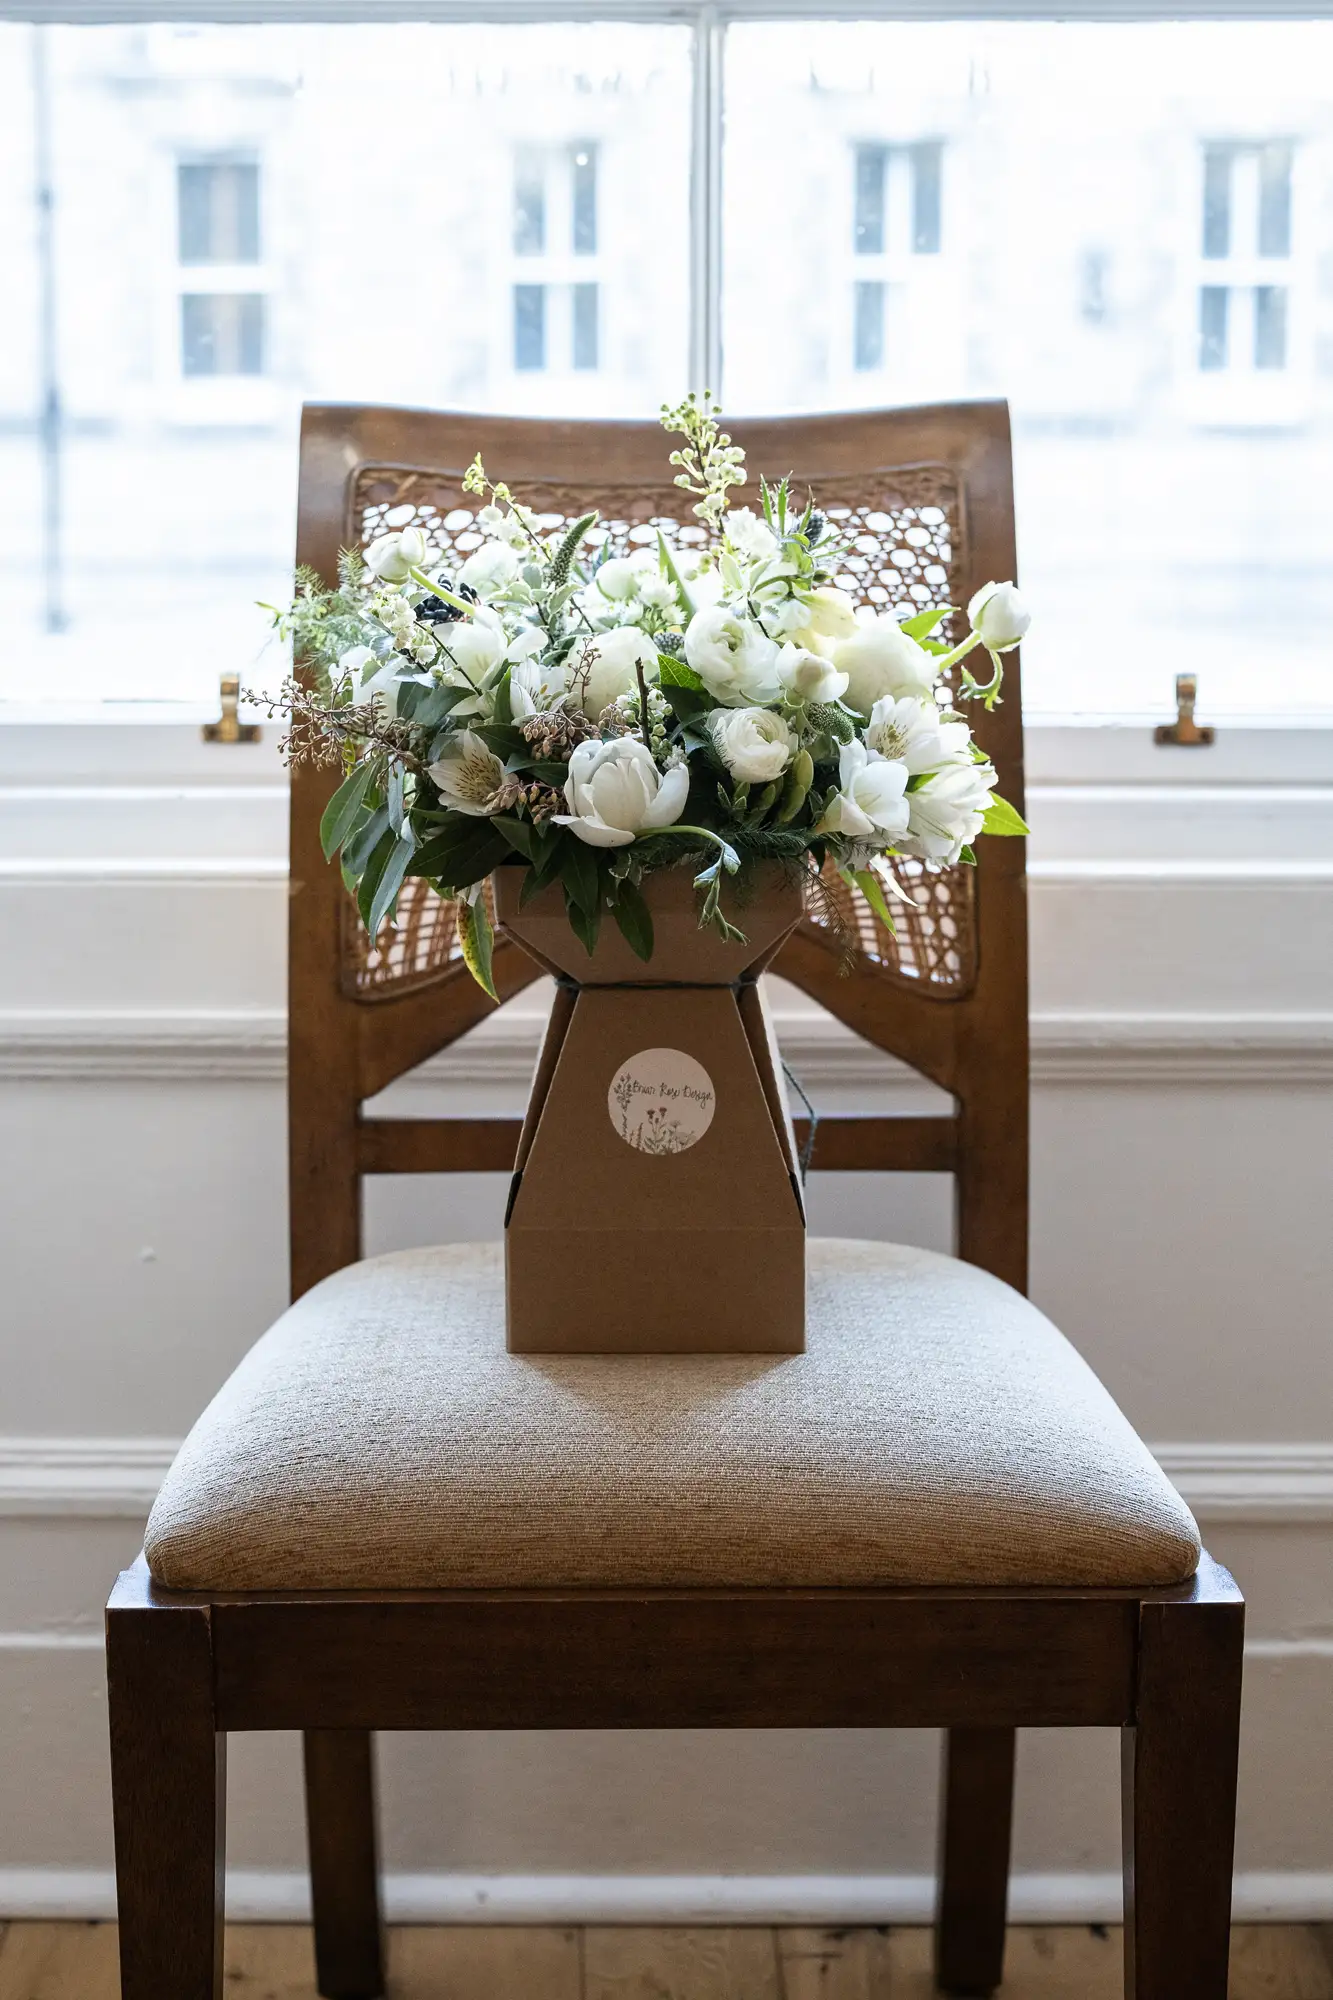 A floral arrangement in a paper bag sits on a chair by a window, featuring predominantly white flowers and greenery.